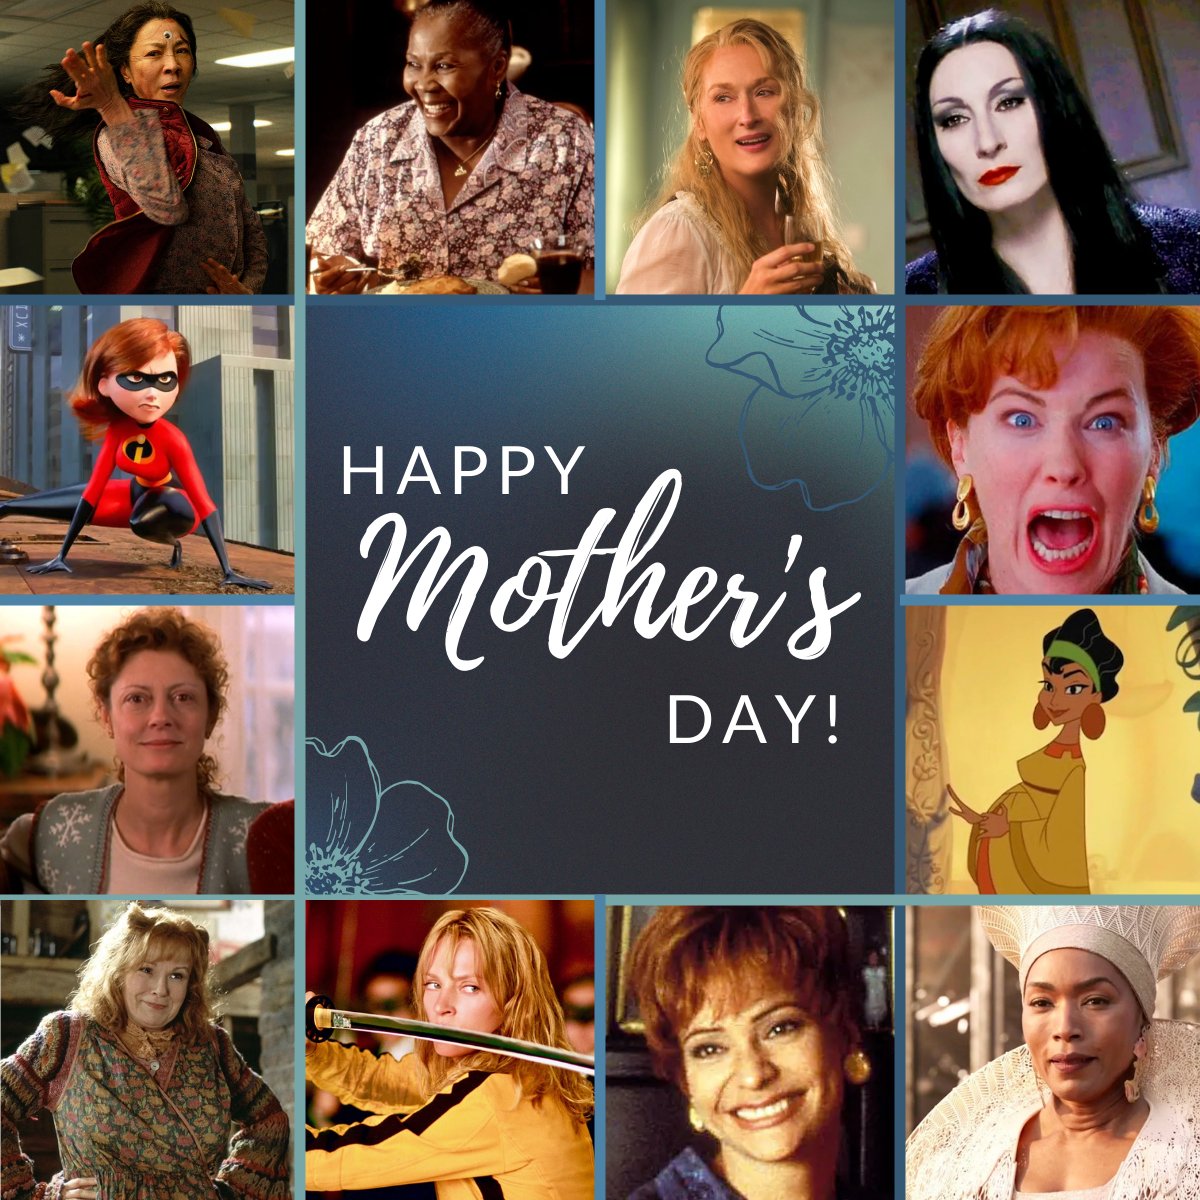 💐 #HappyMothersDay! Share your favorite movie mama in the comments below!